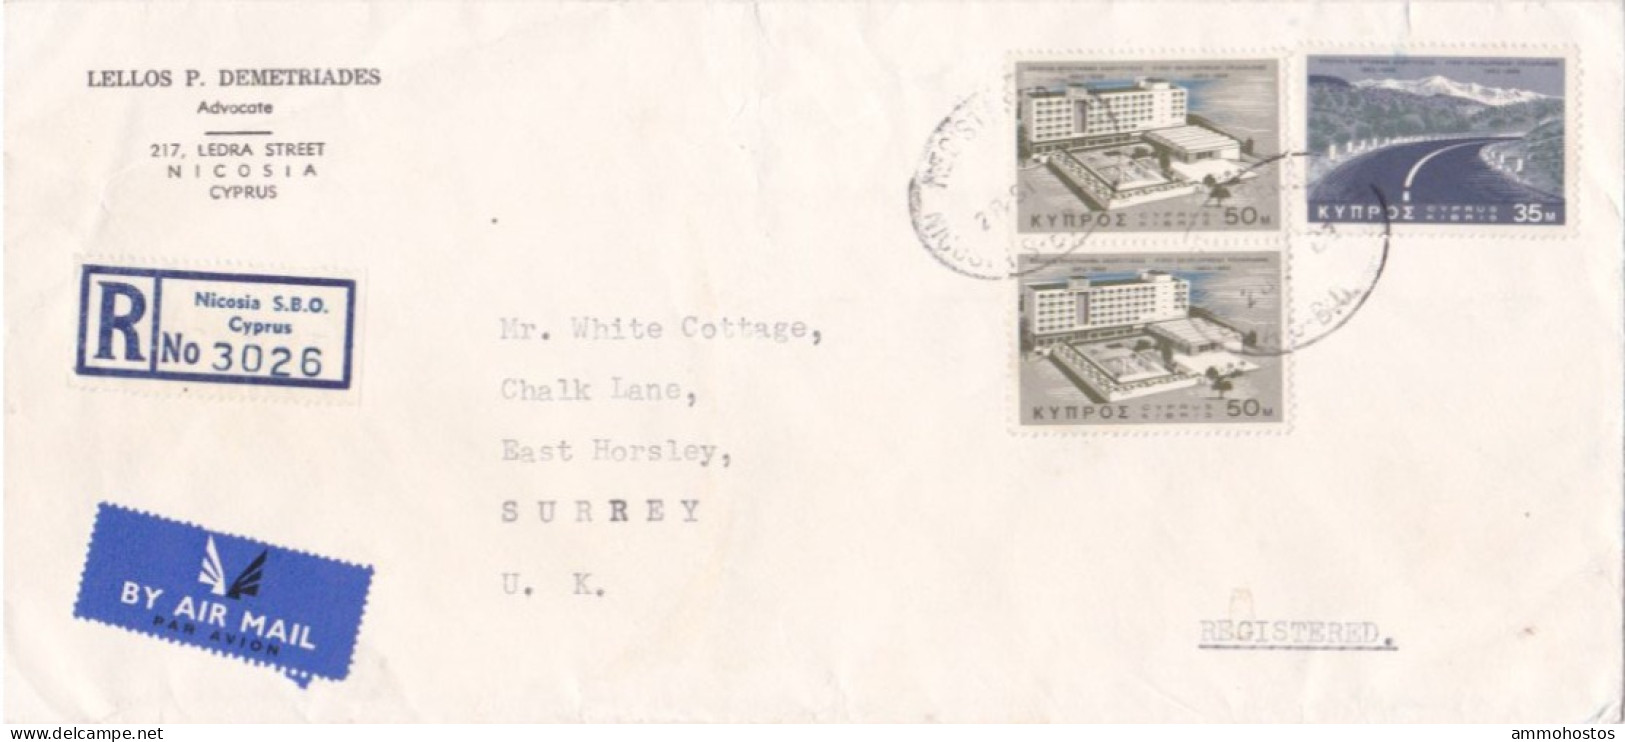 CYPRUS 1967 AIRMAIL REGISTERED COVER NICOSIA SBO UK 185 MILS RATE - Chipre (...-1960)